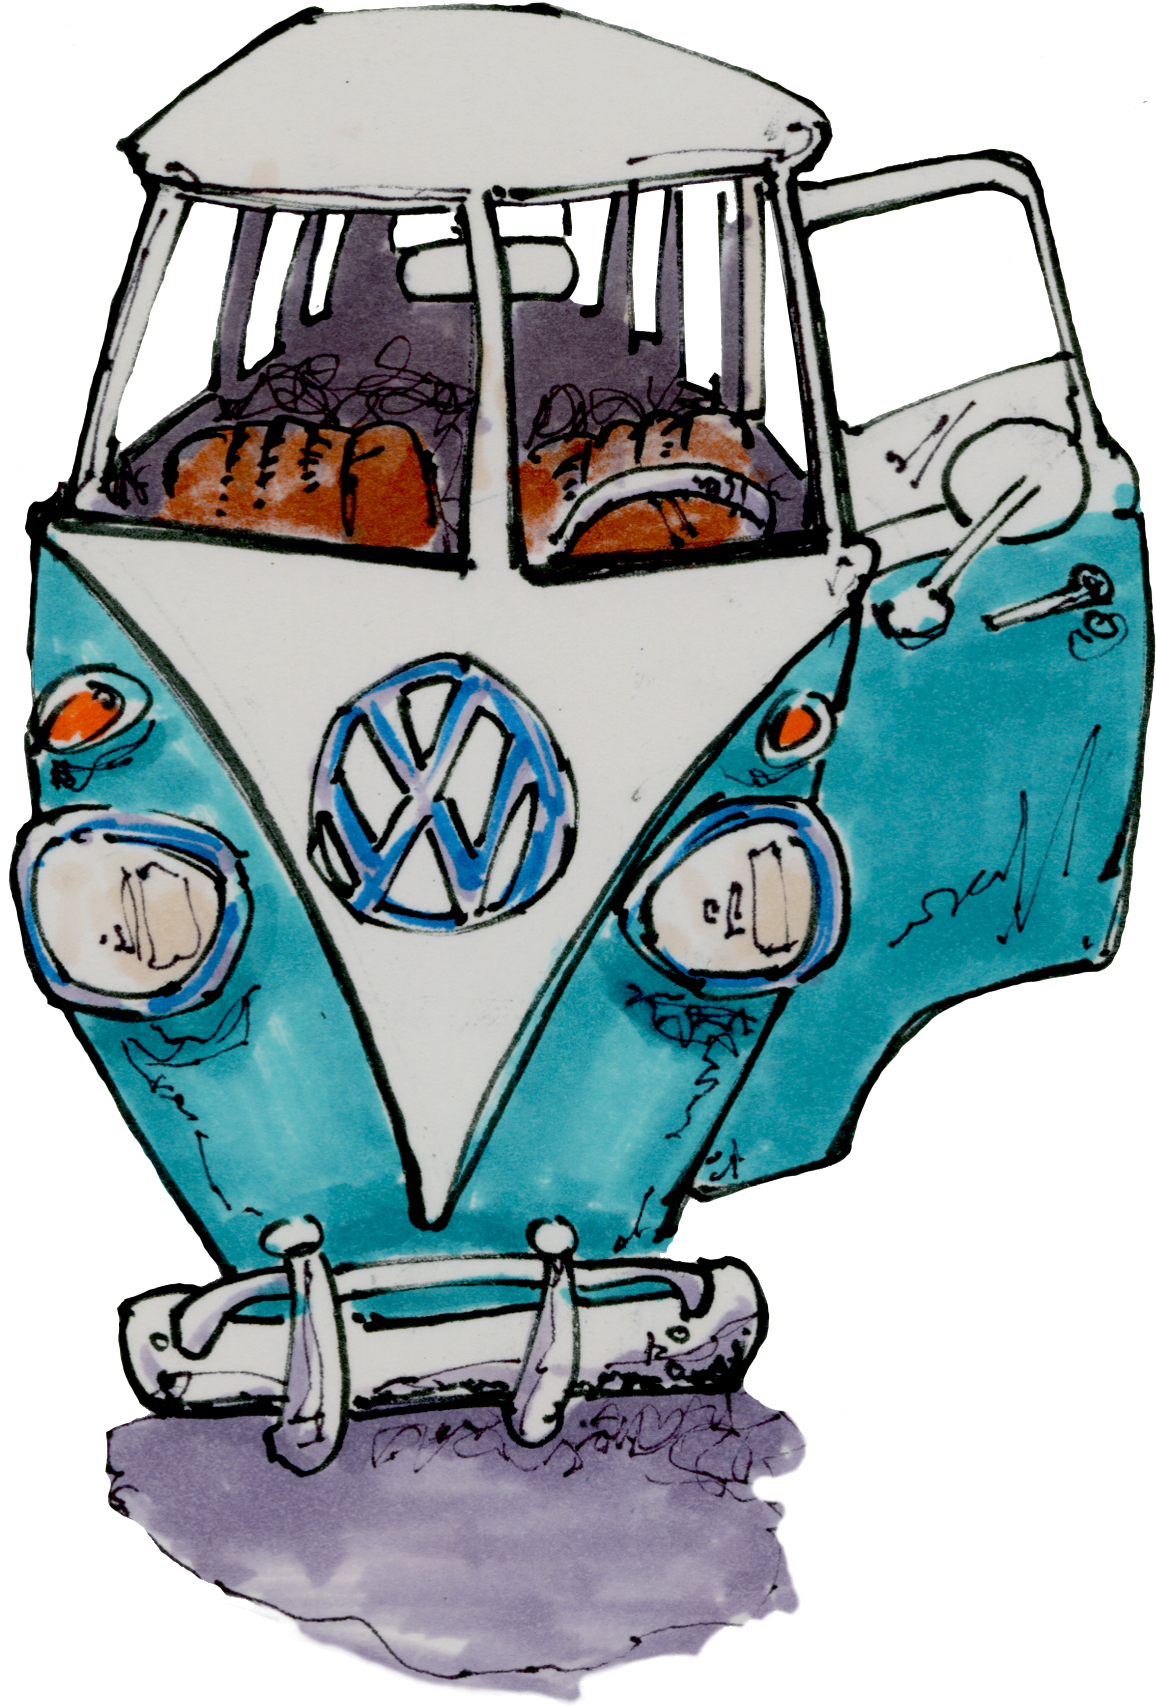 Series Of Vw Bus Sketches - Series Of Vw Bus Sketches (1174x1726)